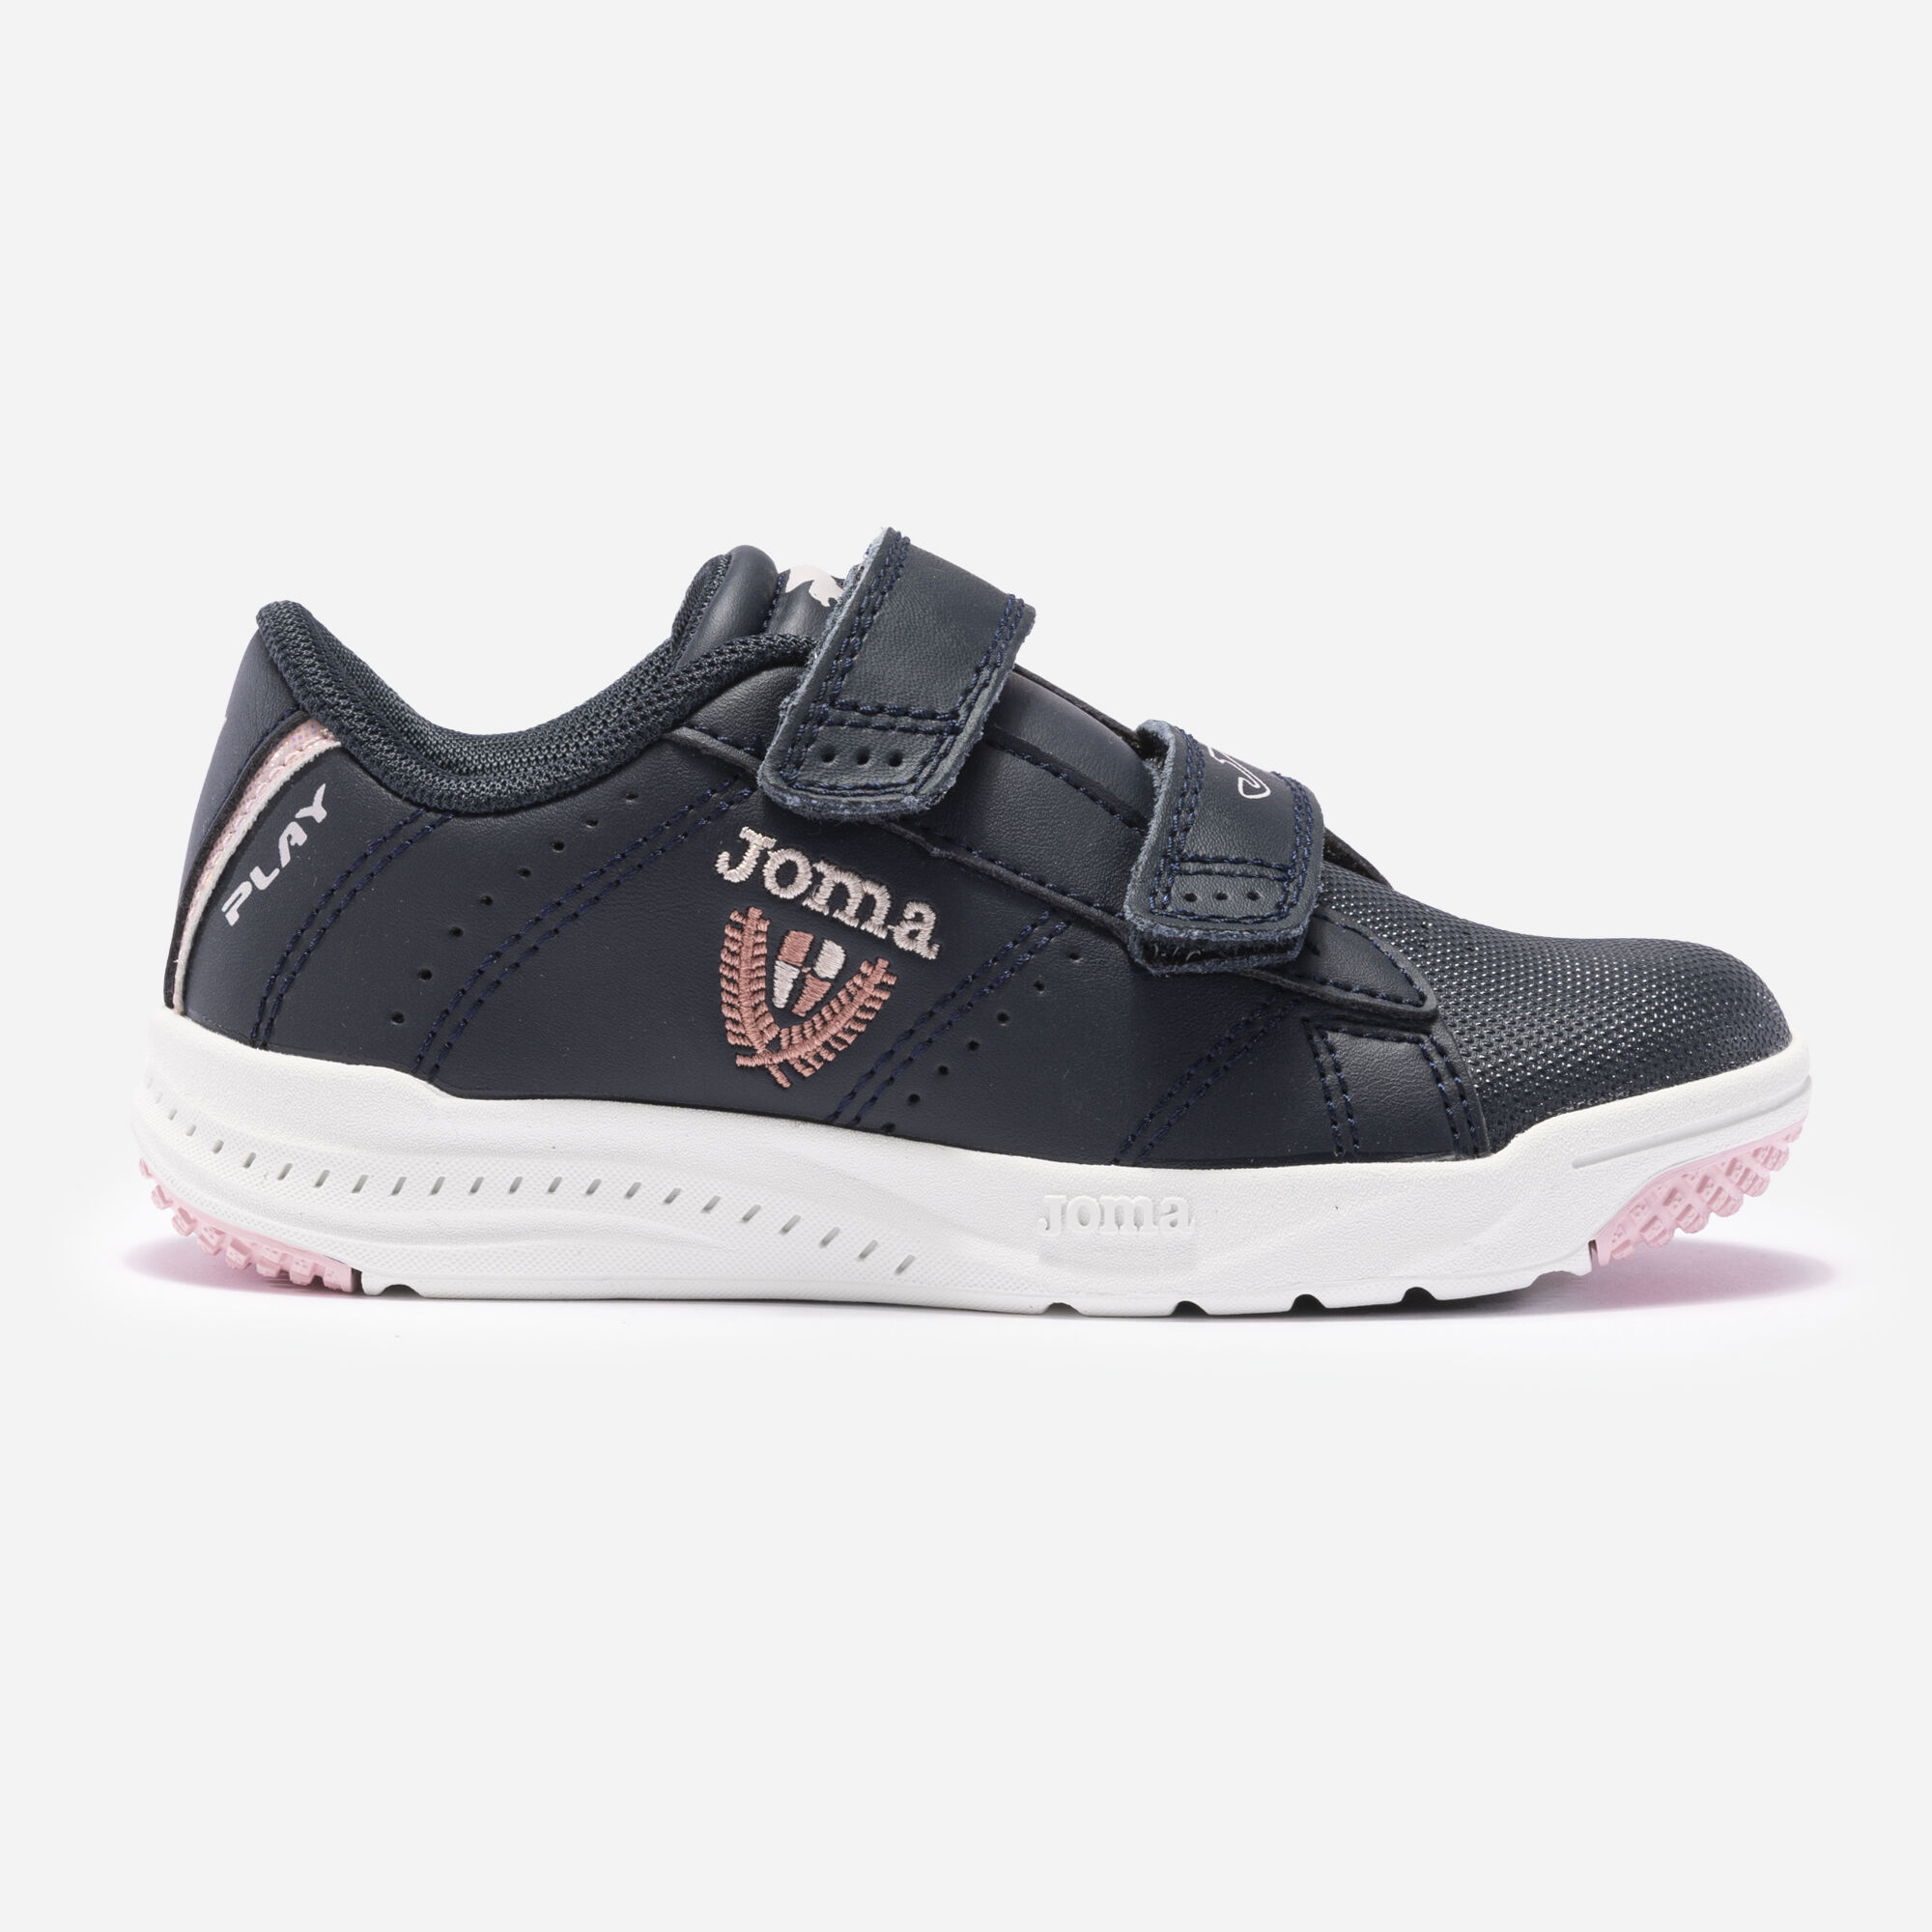 CASUAL SHOES PLAY 22 JUNIOR NAVY BLUE PINK